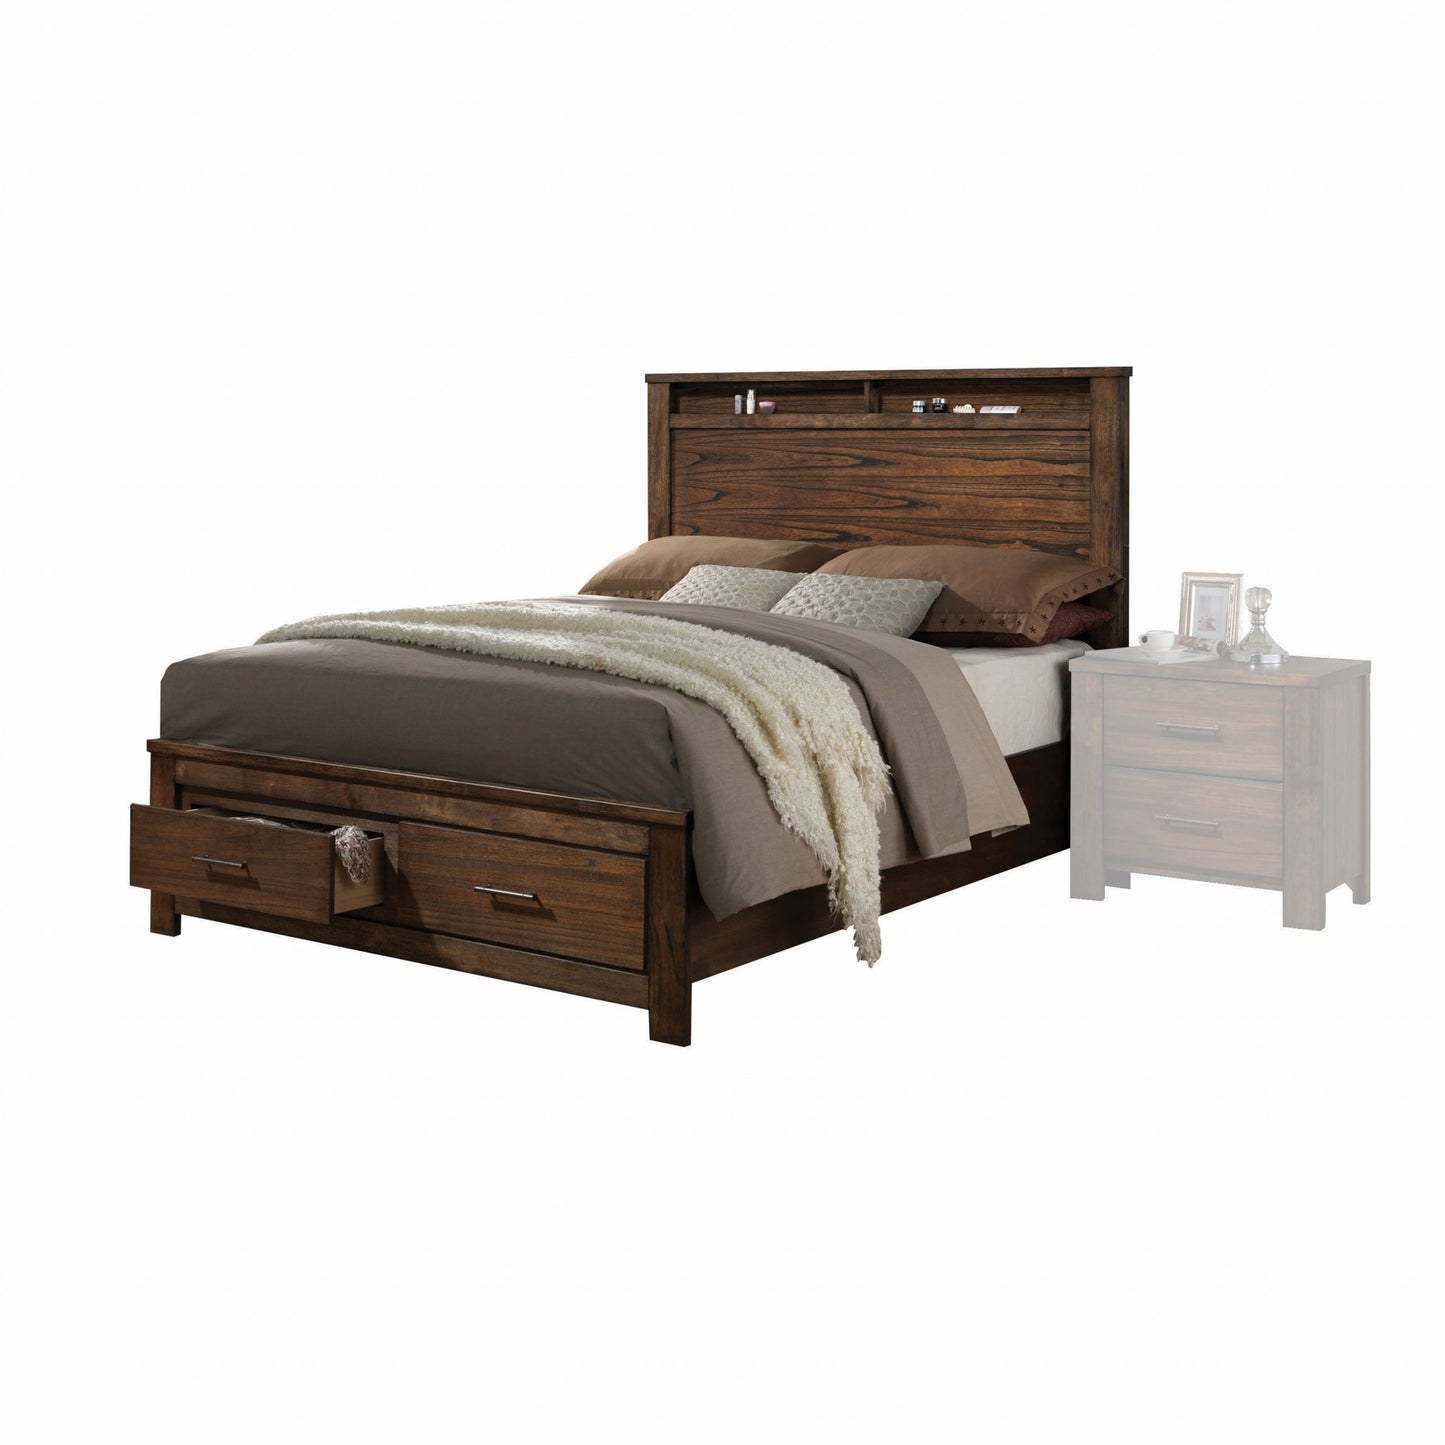 Oak Finish Queen Bed With Storage Headboard And Footboard By Homeroots